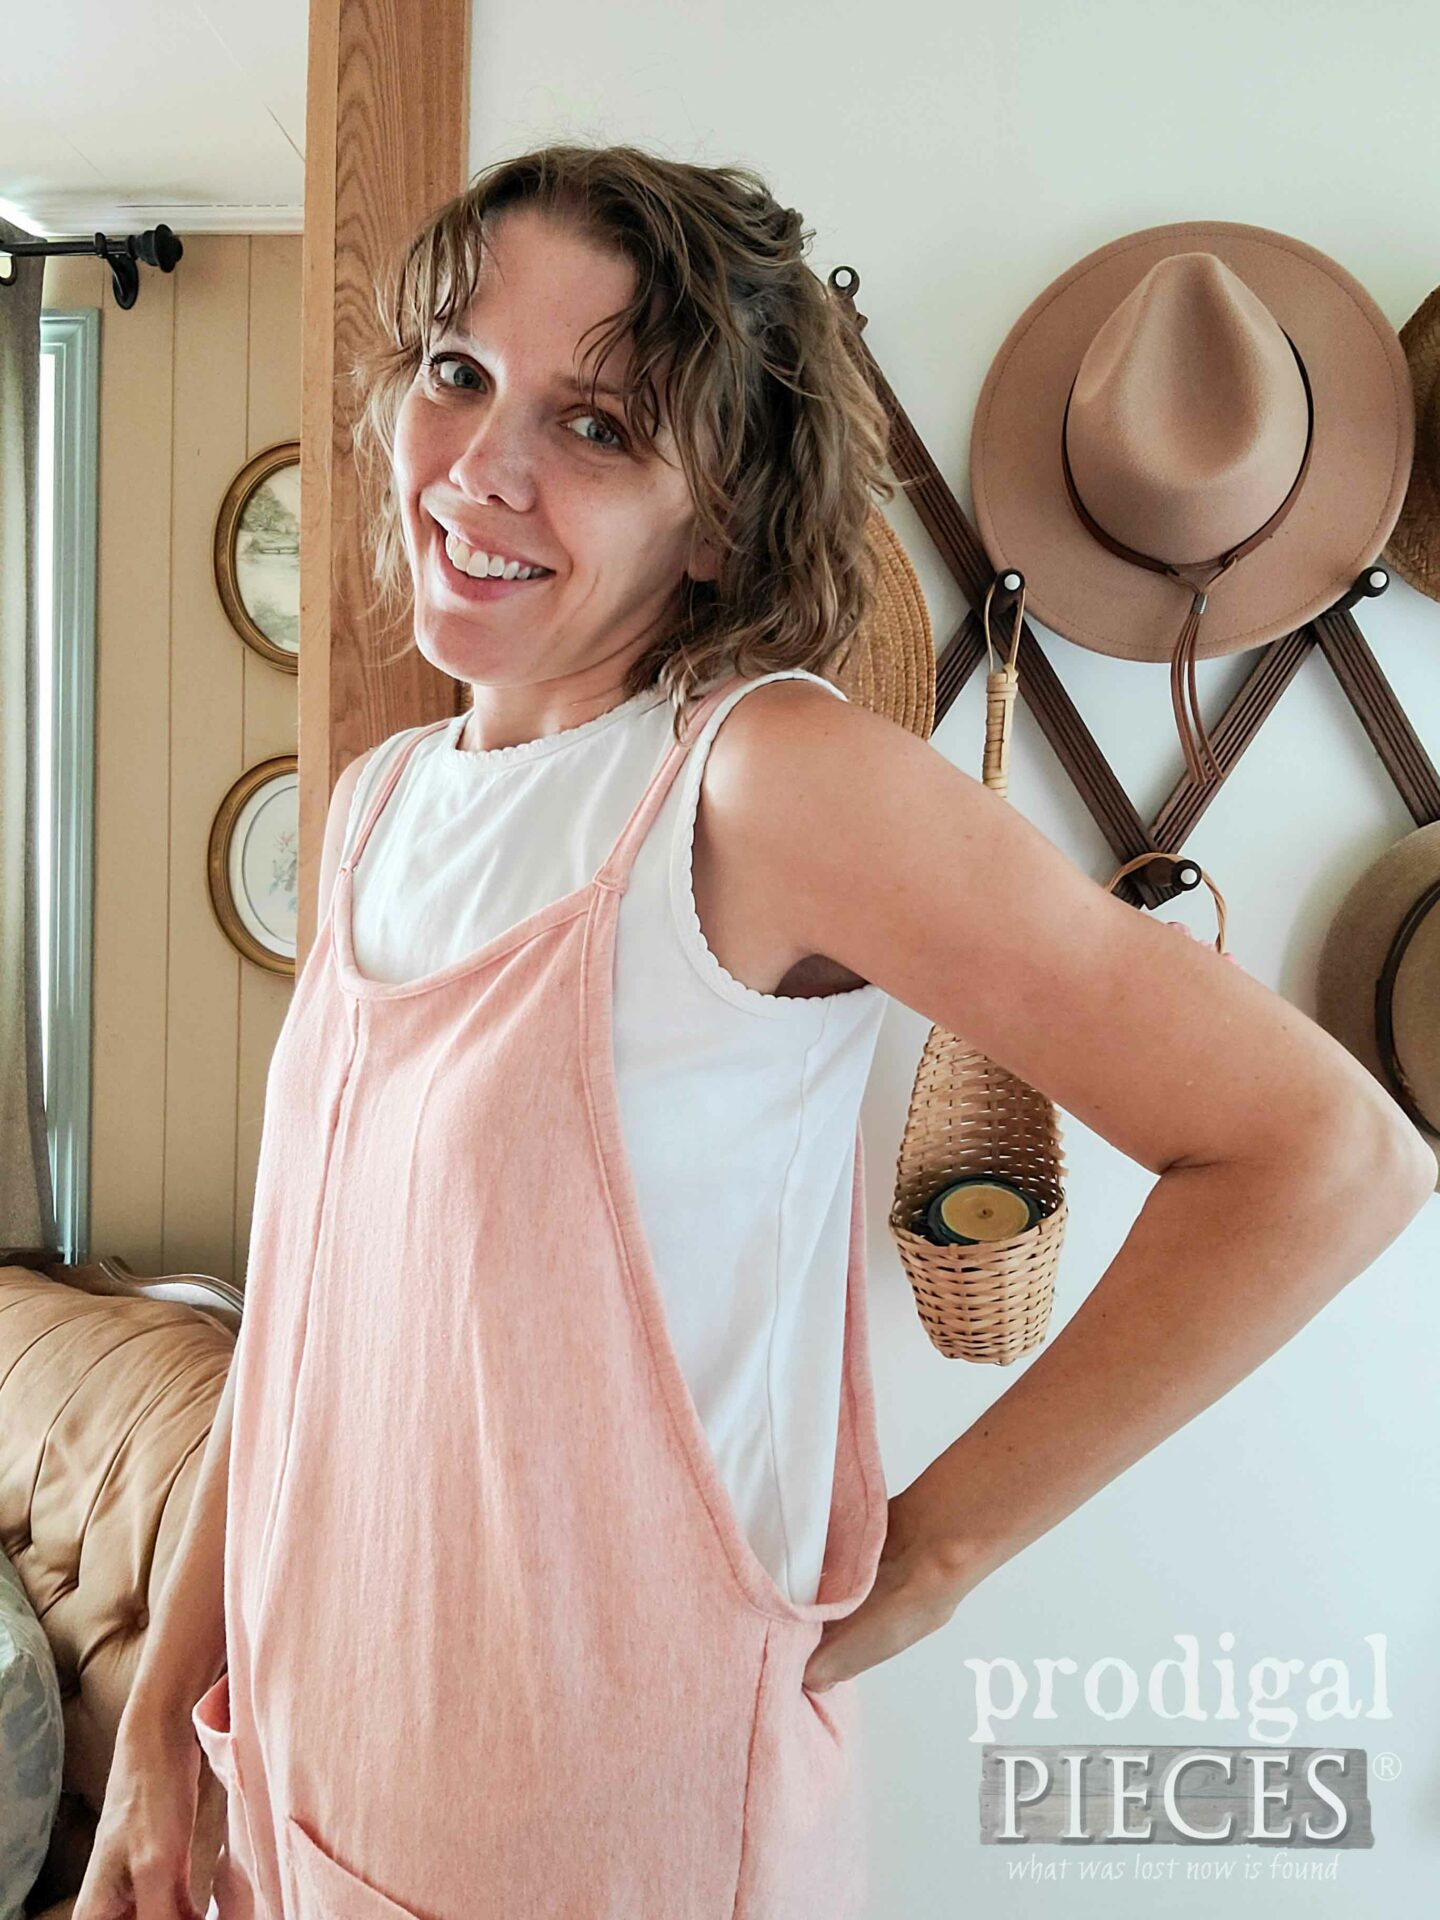 Super Comfy Jersey Knit Romper from Refashioned Bedsheet by Larissa of Prodigal Pieces | prodigalpieces.com #prodigalpieces #comfy #refashion